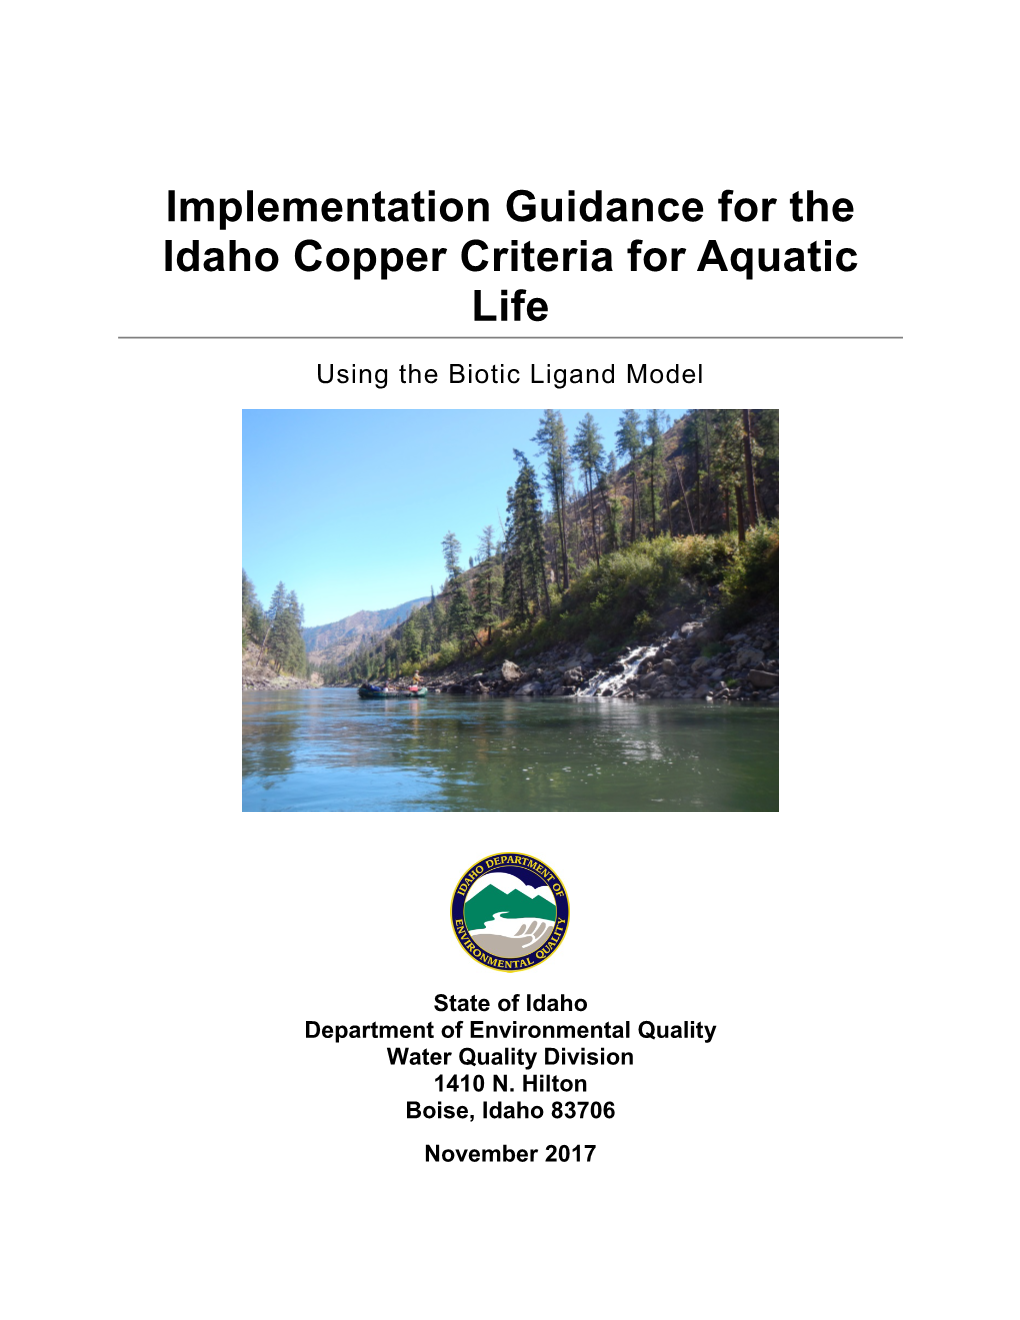 Implementation Guidance for the Idaho Copper Criteria for Aquatic Life